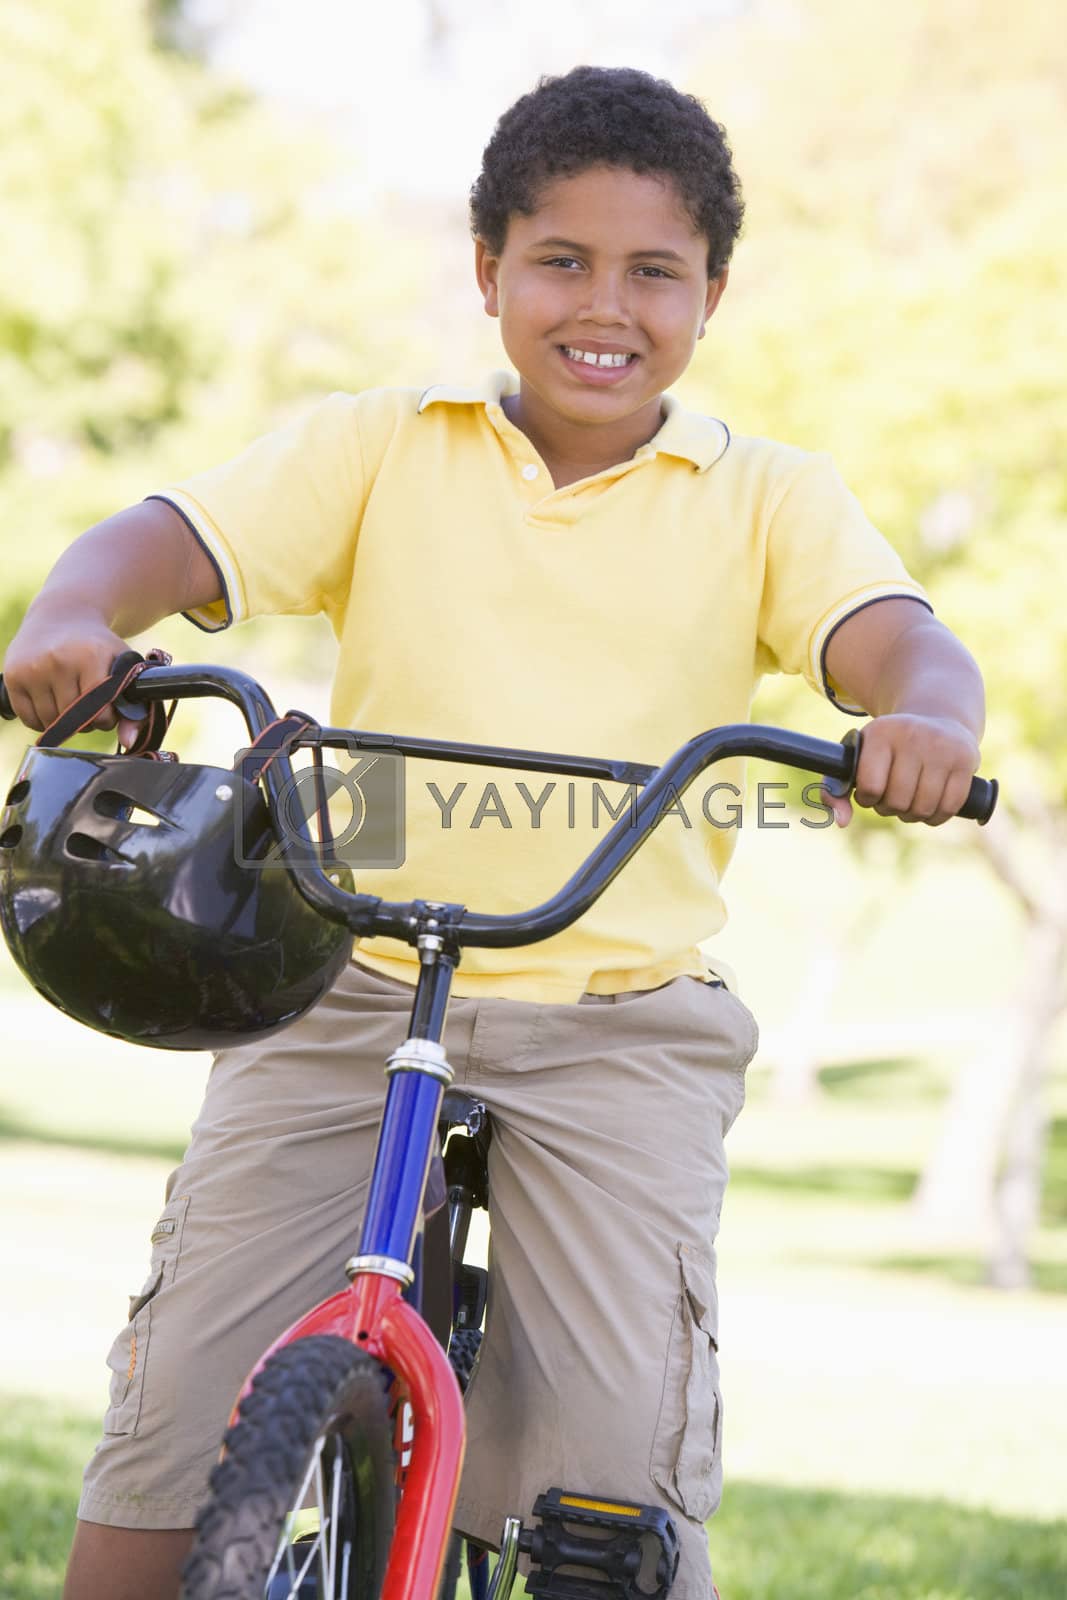 Royalty free image of Young boy on bicycle outdoors smiling by MonkeyBusiness